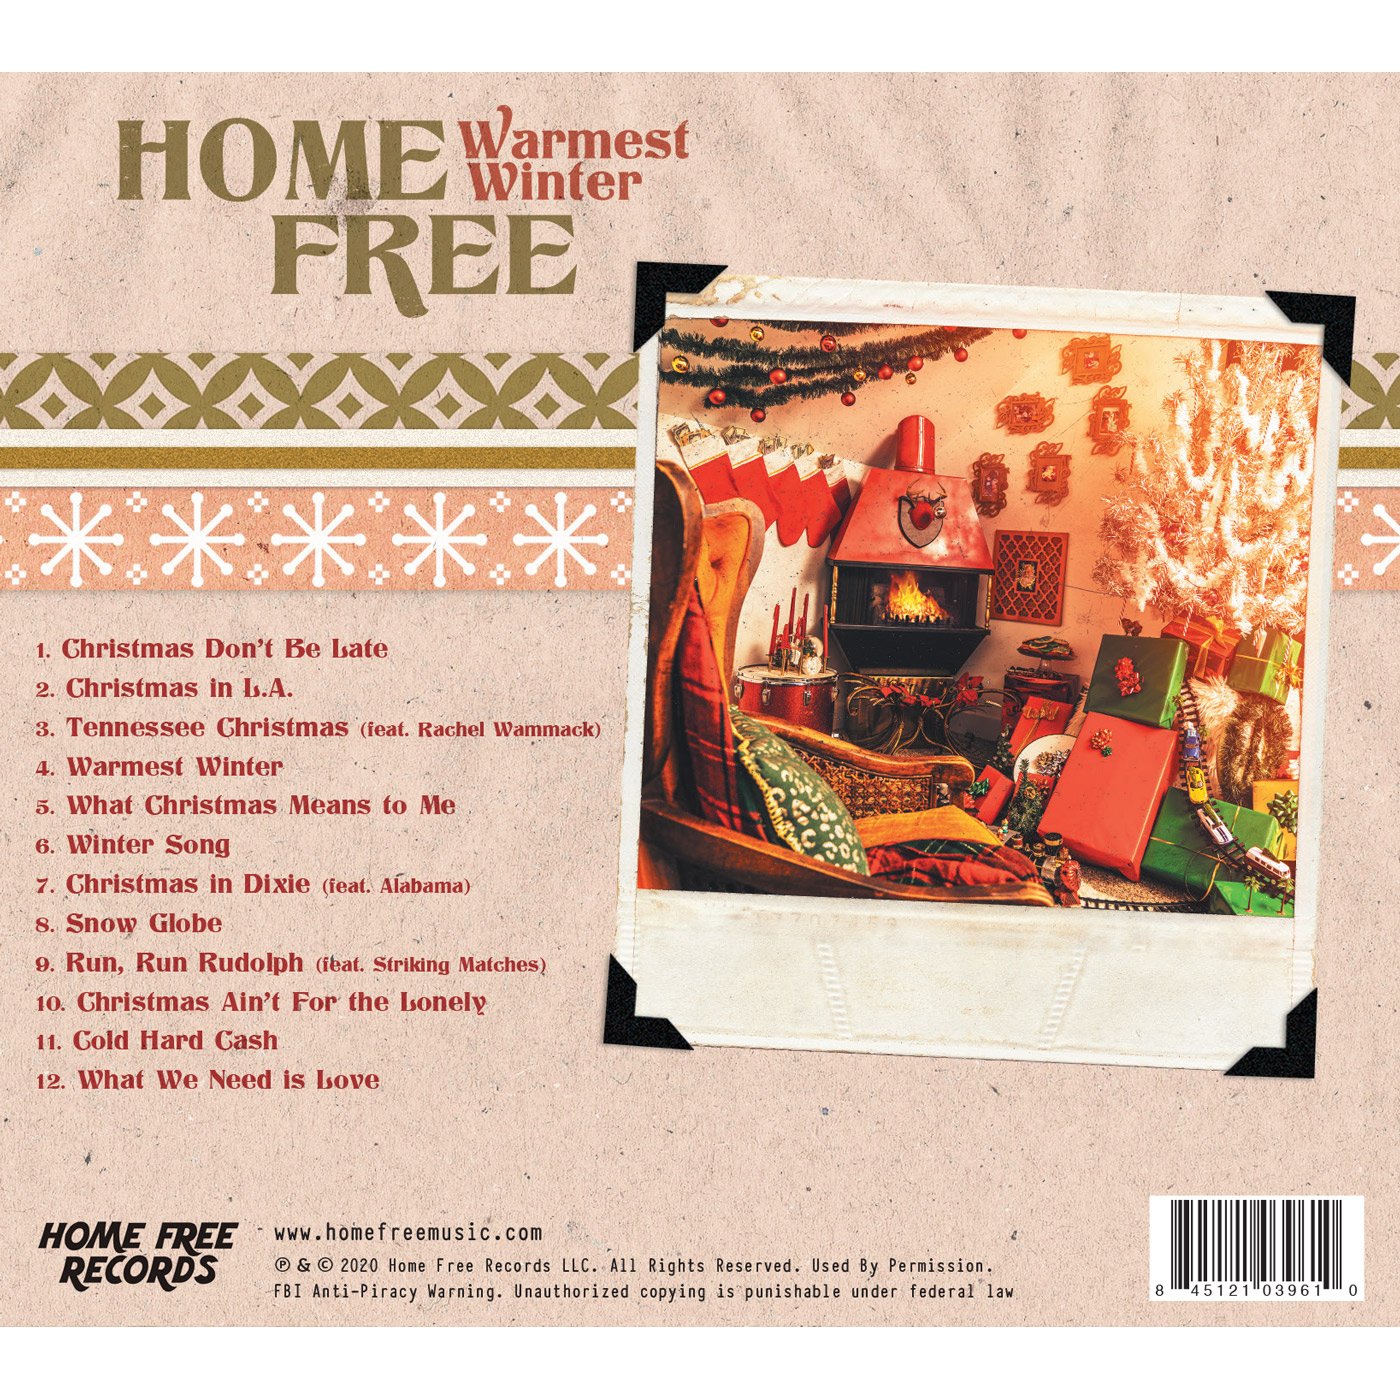 Home Free - Warmest Winter Autographed CD | Home Free Music